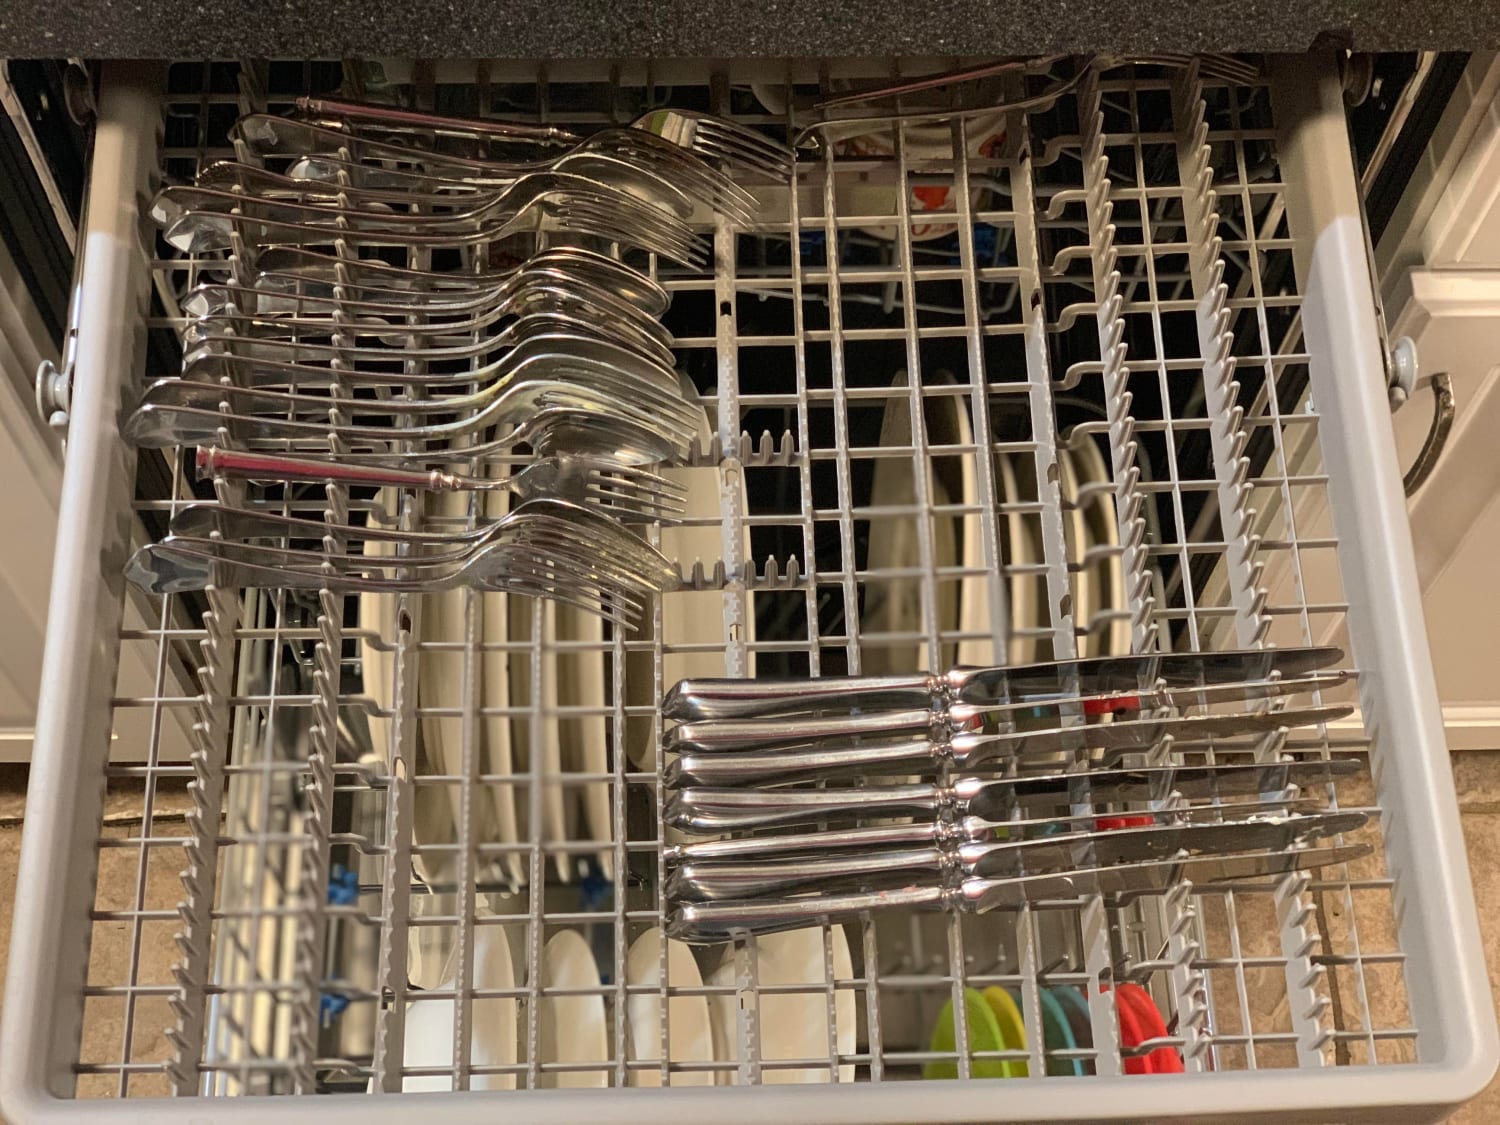 Our new dishwasher has three shelves. The top shelf is so insanely satisfying to load the silverware onto.